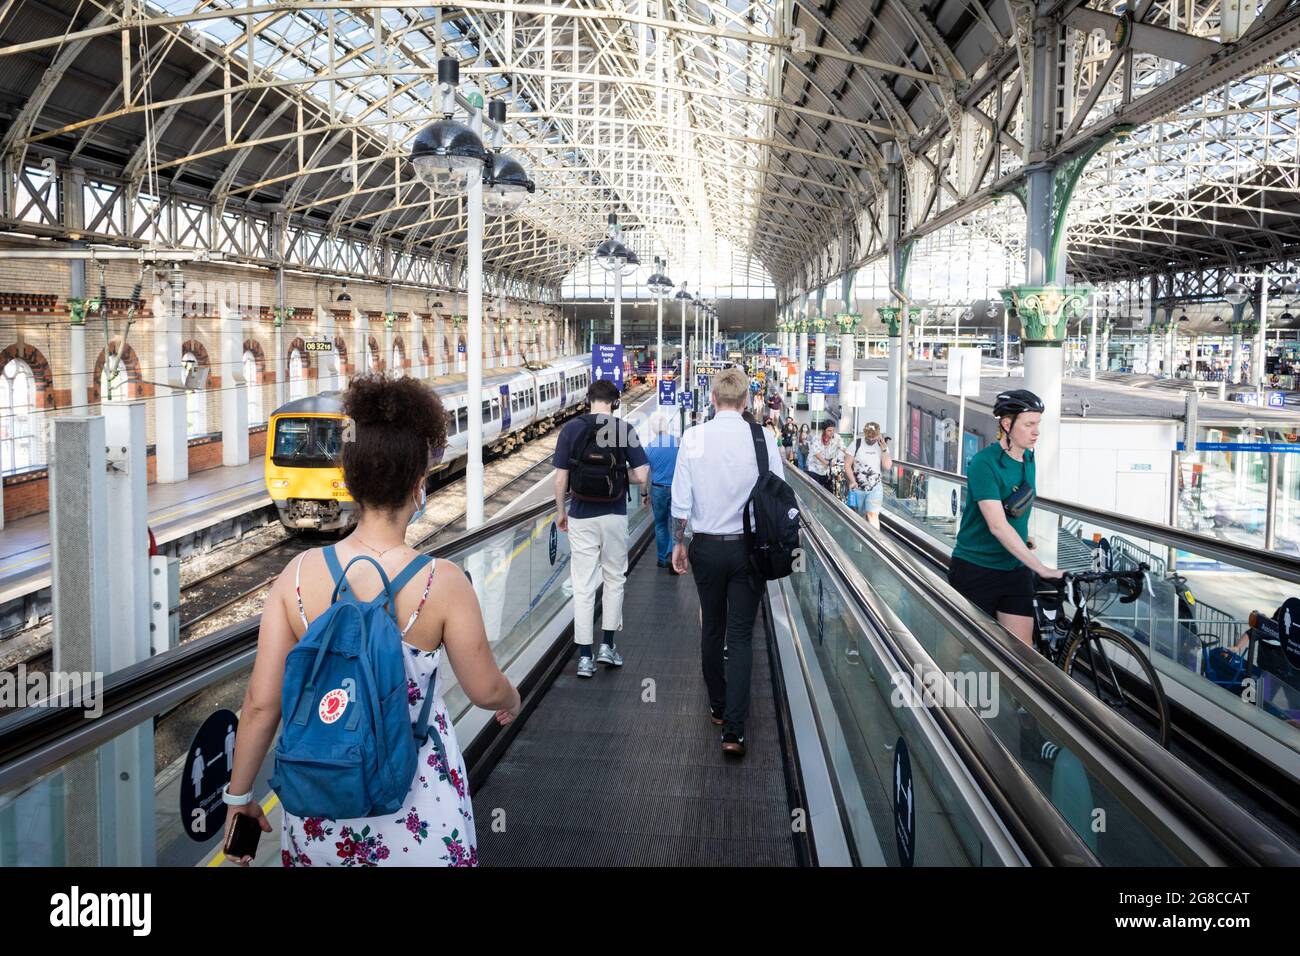 Manchester, UK. 19th July, 2021. Morning commuters make their way through Piccadilly train station to work on the first day of freedom since the COVID19 lockdown restrictions were implemented 16 months ago. Credit: Andy Barton/Alamy Live News Stock Photo